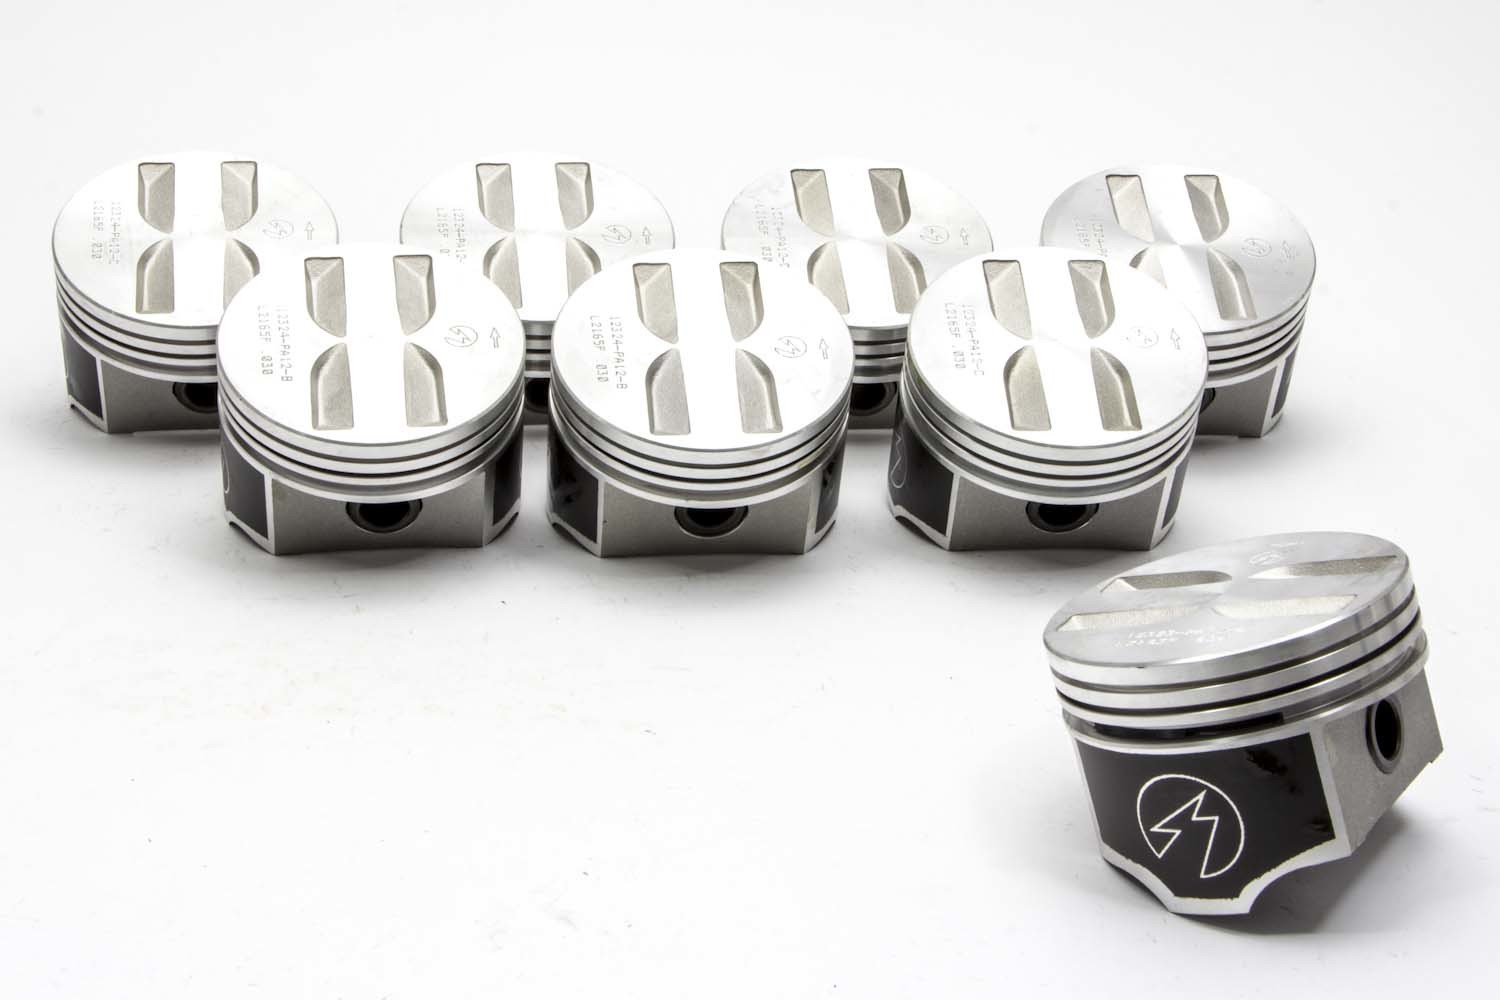 Sealed Power L2165F40 Piston, Speed Pro, Forged, 4.040 in Bore, 5/64 x 5/64 x 3/16 in Ring Grooves, Minus 5.40 cc, Coated Skirt, Small Block Chevy, Set of 8